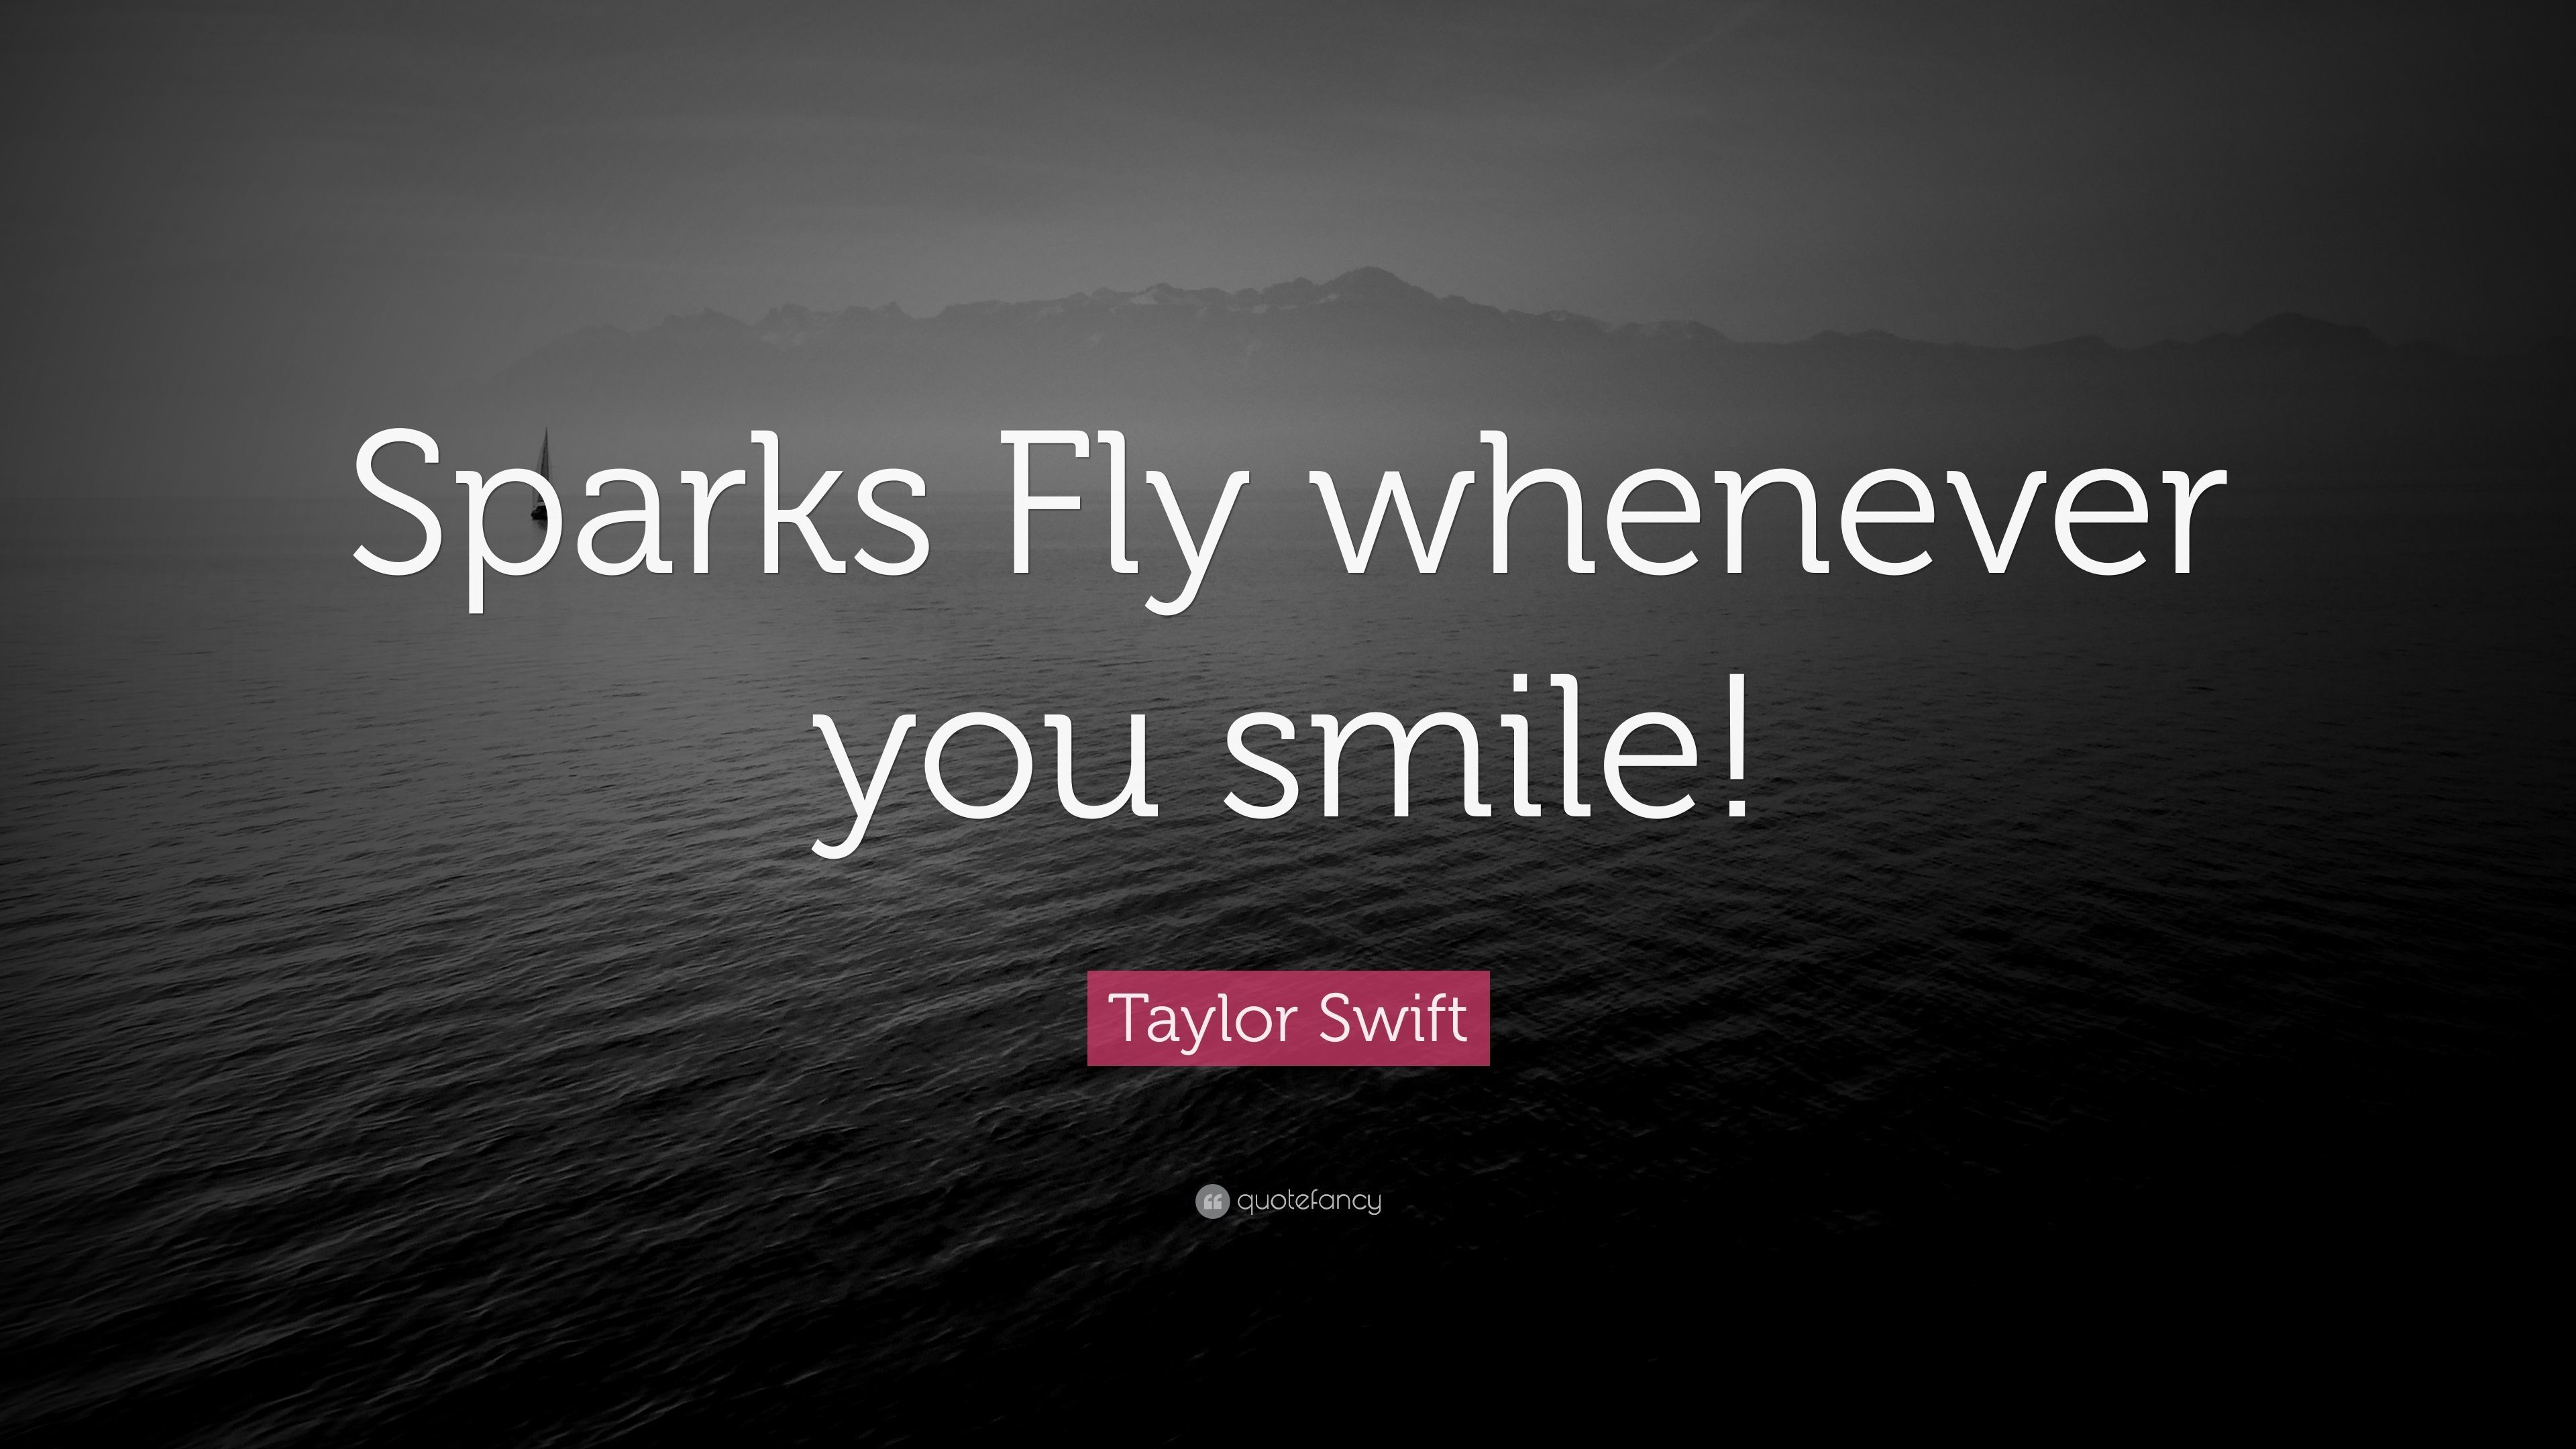 Taylor Swift Quote: “Sparks Fly whenever you smile!” 7 wallpaper